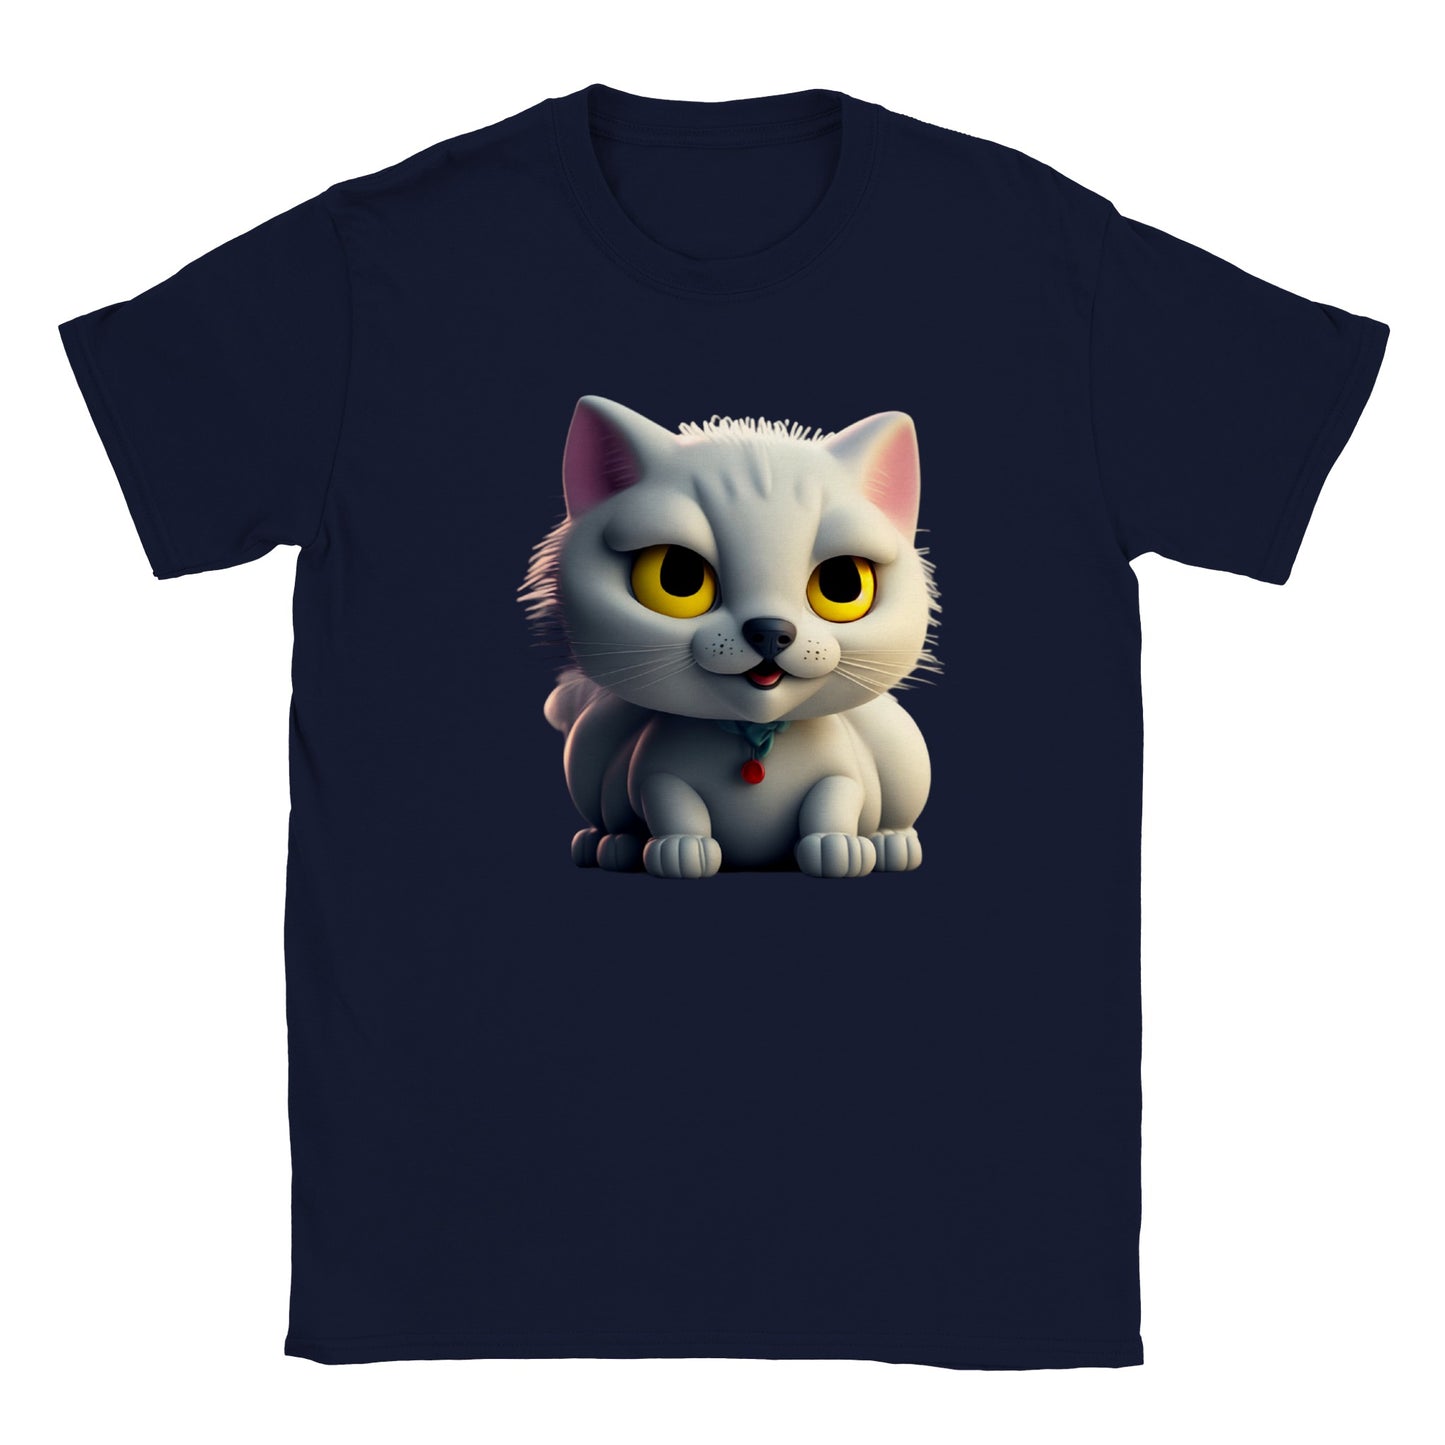 Adorable, Cool, Cute Cats and Kittens Toy - Classic Kids Crewneck T-Shirt 52